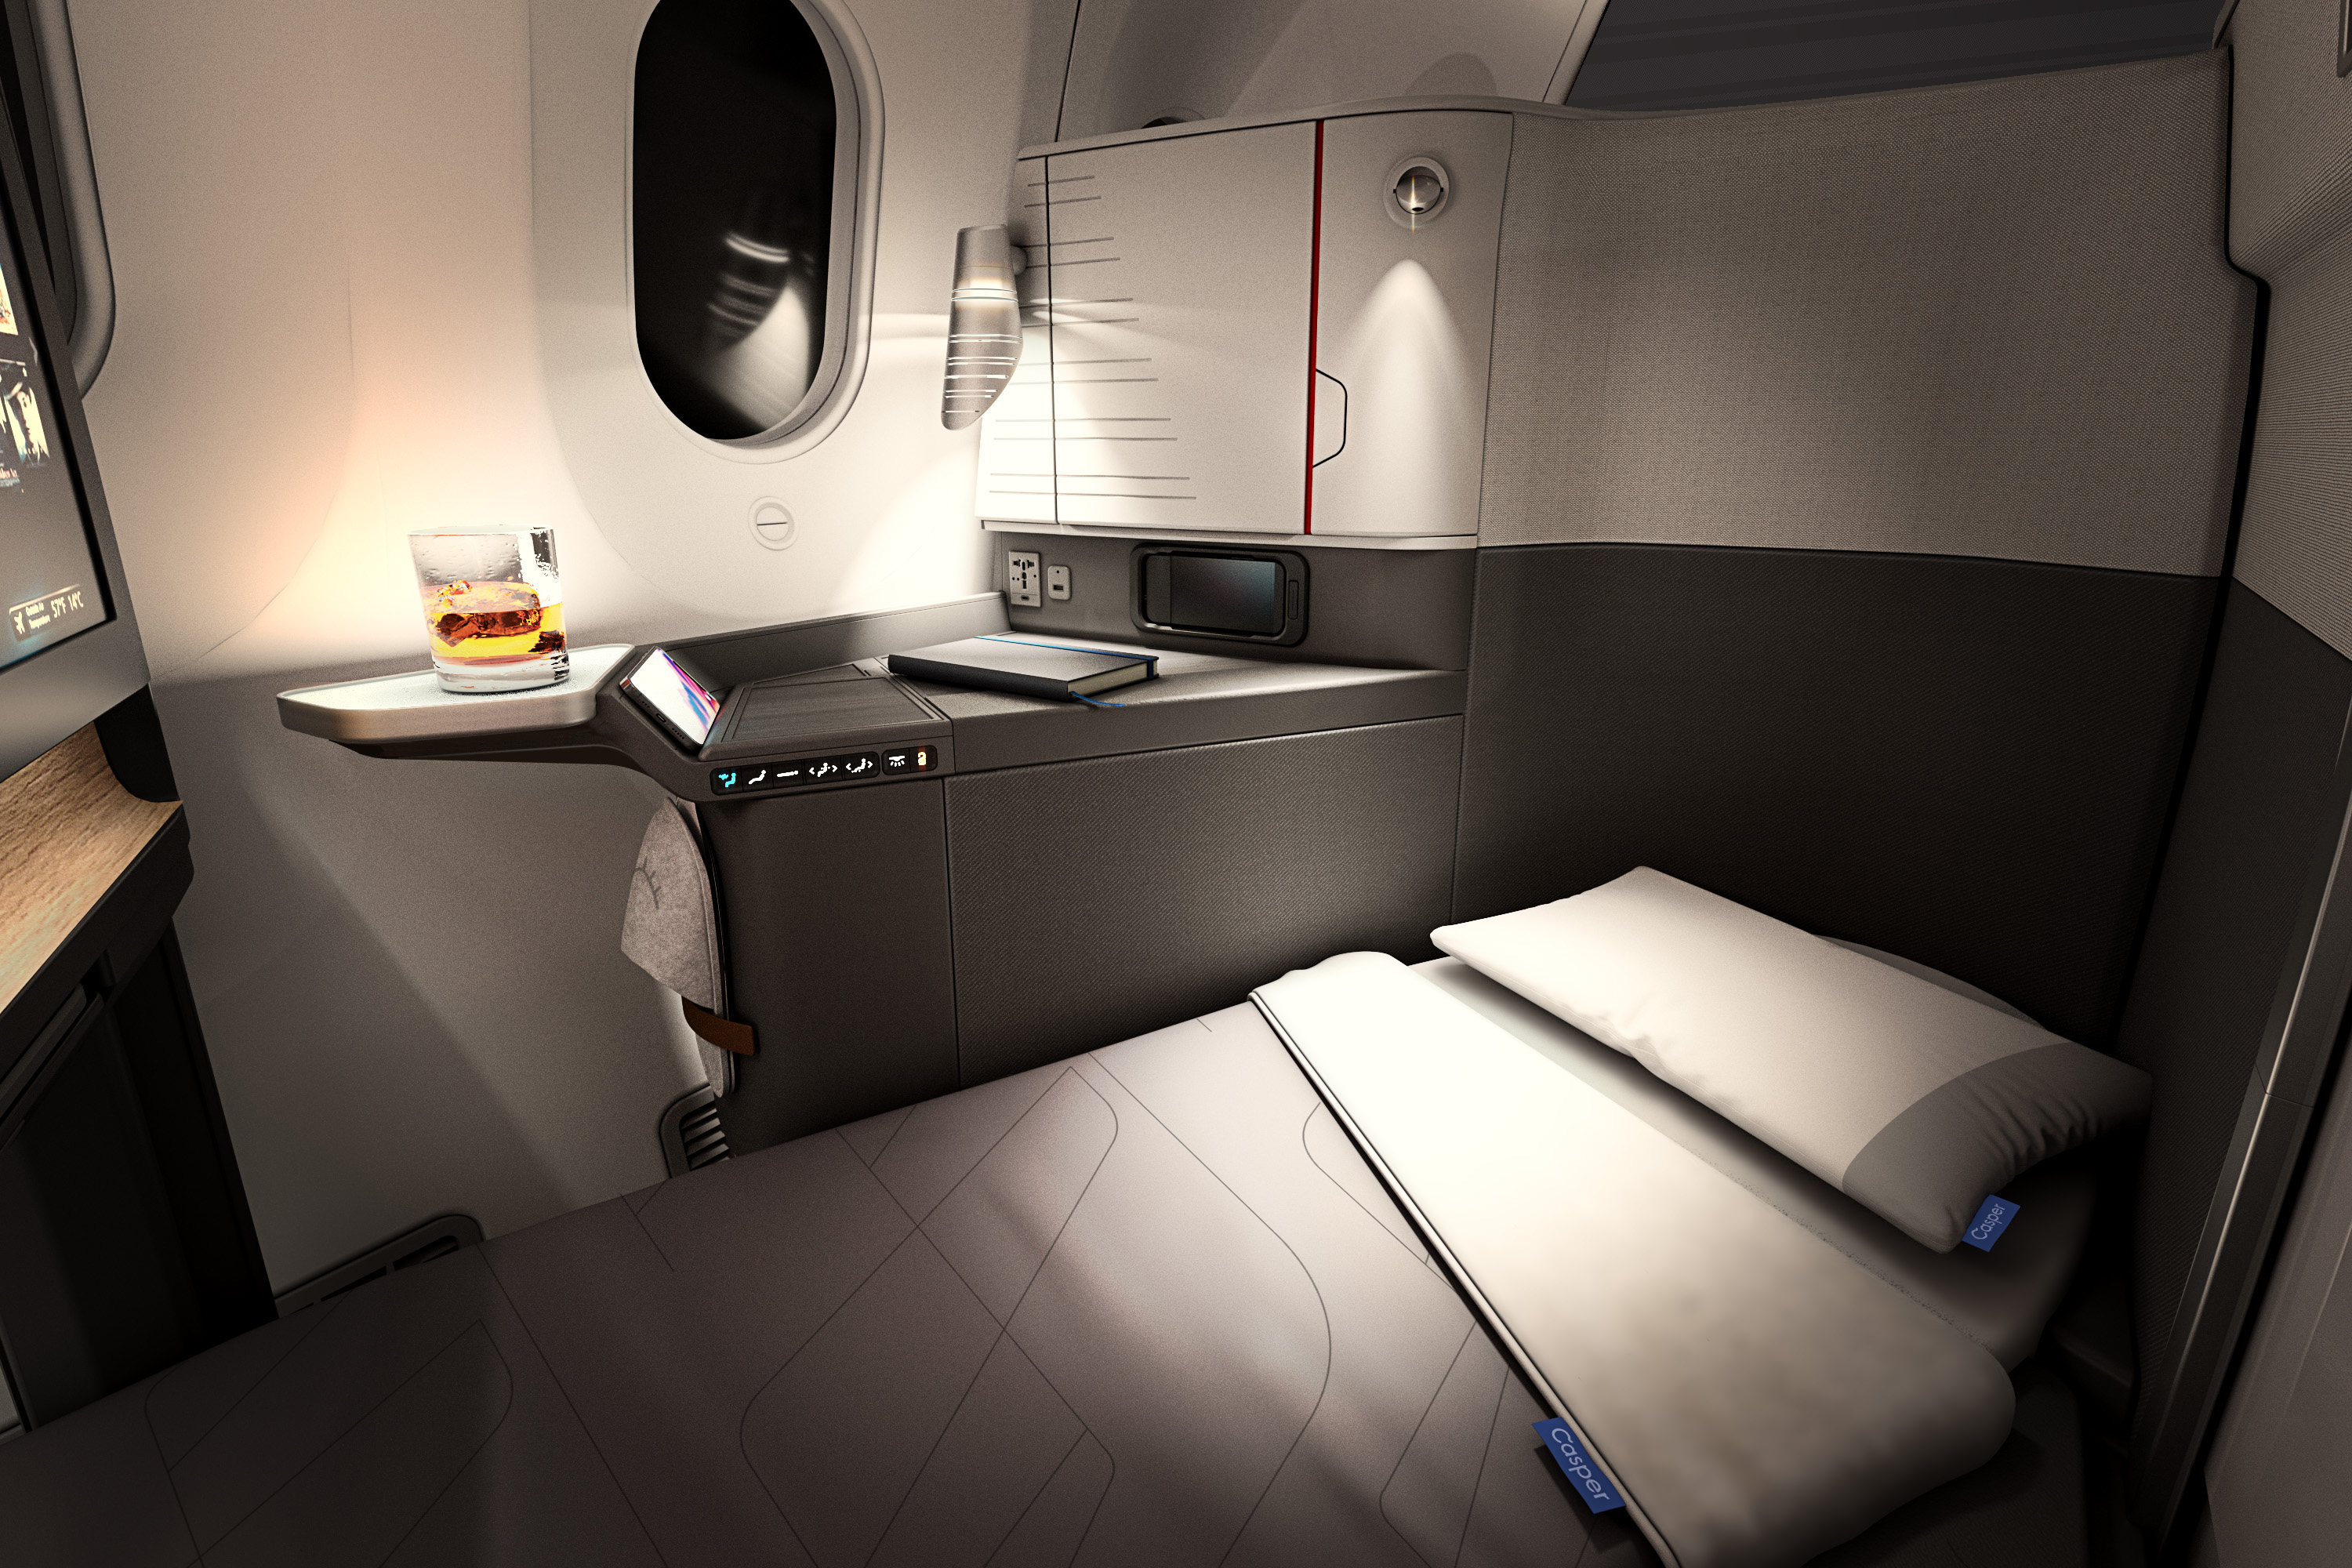 American Airlines introduces new business class: Flagship Suites